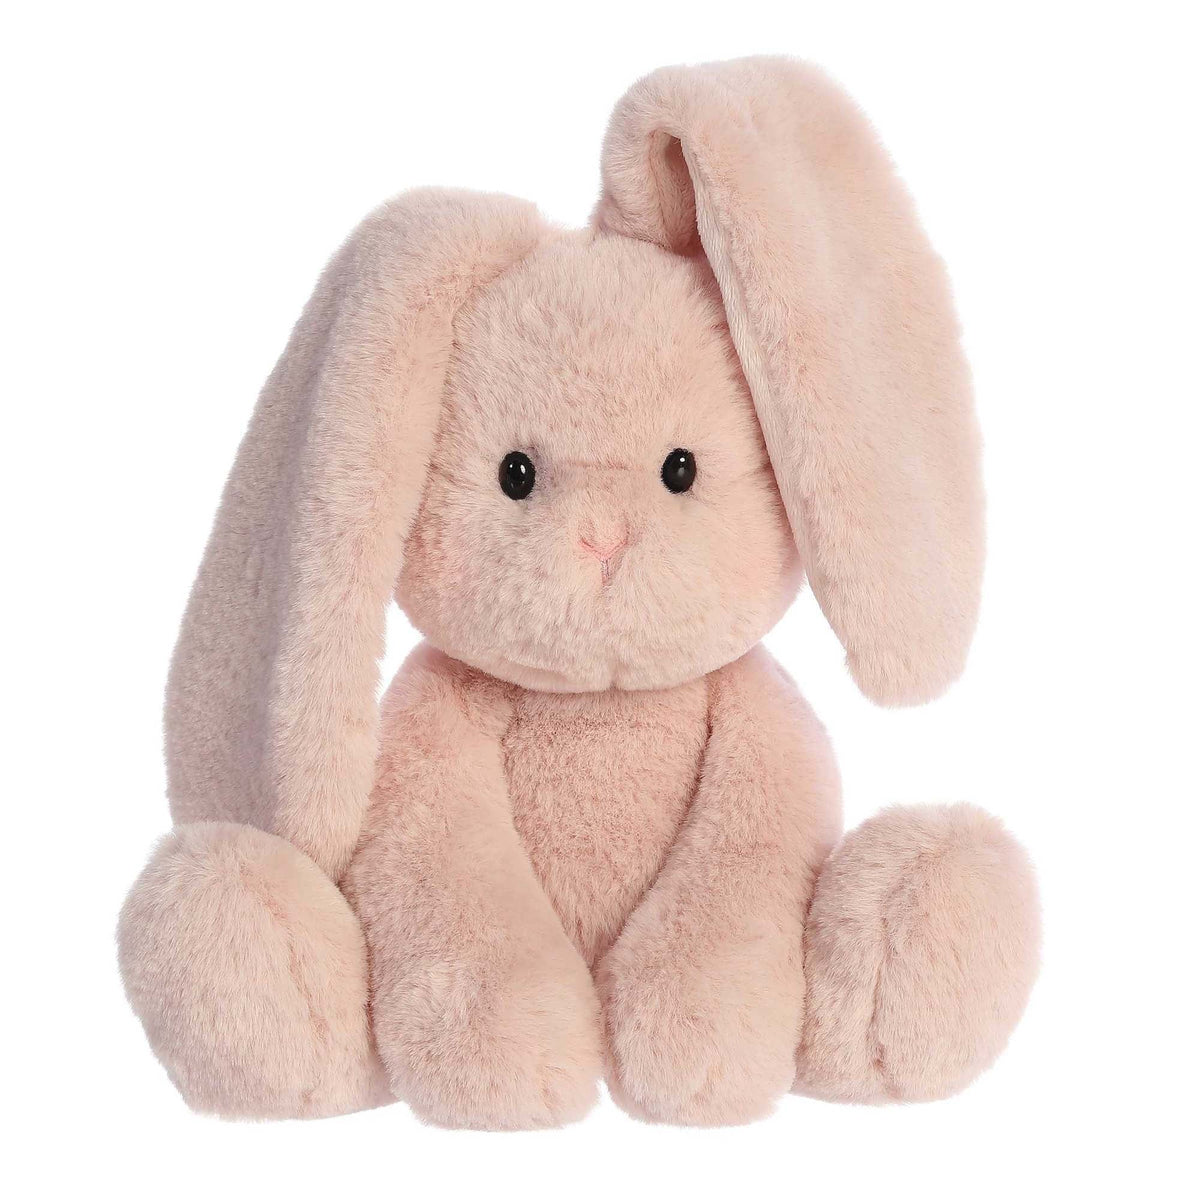 Aurora World Easter Candy Cottontails Rabbit Plush, Pink, 11 Inches, 1 Count